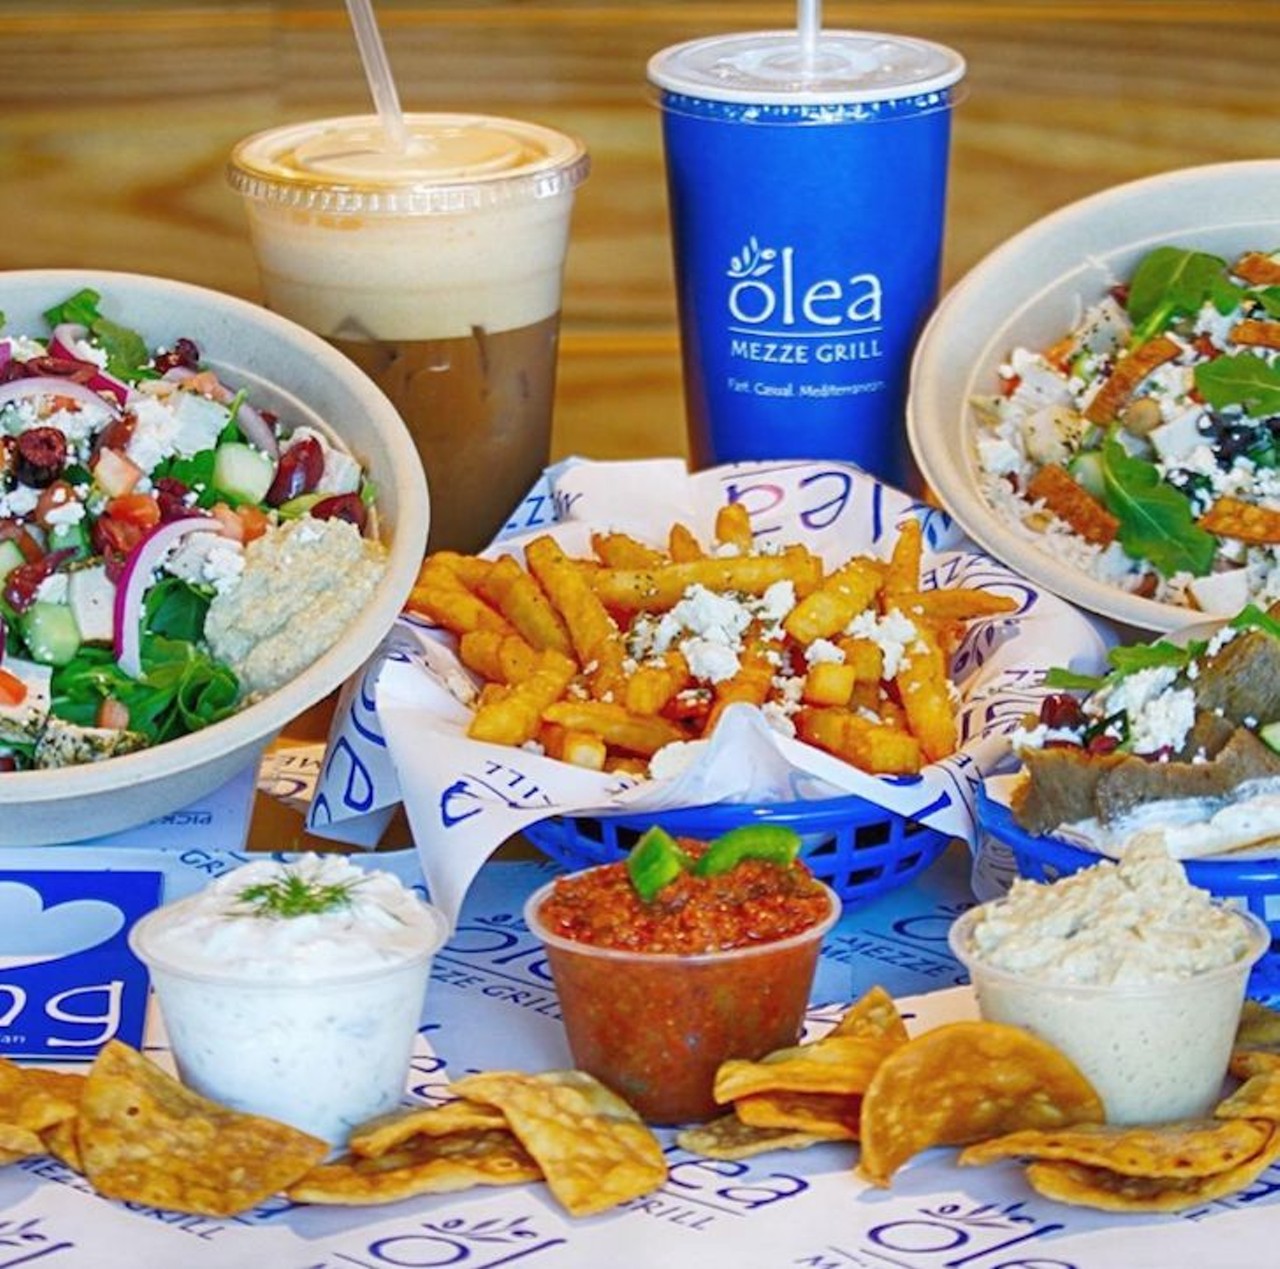 Olea Mezze Grill
400 S. Orlando Ave., Maitland/1829 WP Ball Blvd., Sanford | 407-335-4958 (Maitland), 407-878-3579 (Sanford)
Olea, a fresh-casual Greek joint, is part of the new breed of eateries bent on made-from-scratch offerings and superior customer service. Start with grape leaves imported from Greece and end with heavenly baklava from Hellas Bakery in Tarpon Springs. In between, take your pick from rice or couscous bowls, salad bowls or pita sandwiches. The trick is to temper your desire to top your bowl (or stuff your pita) with any and all available items.
Photo via oleagrill/Instagram